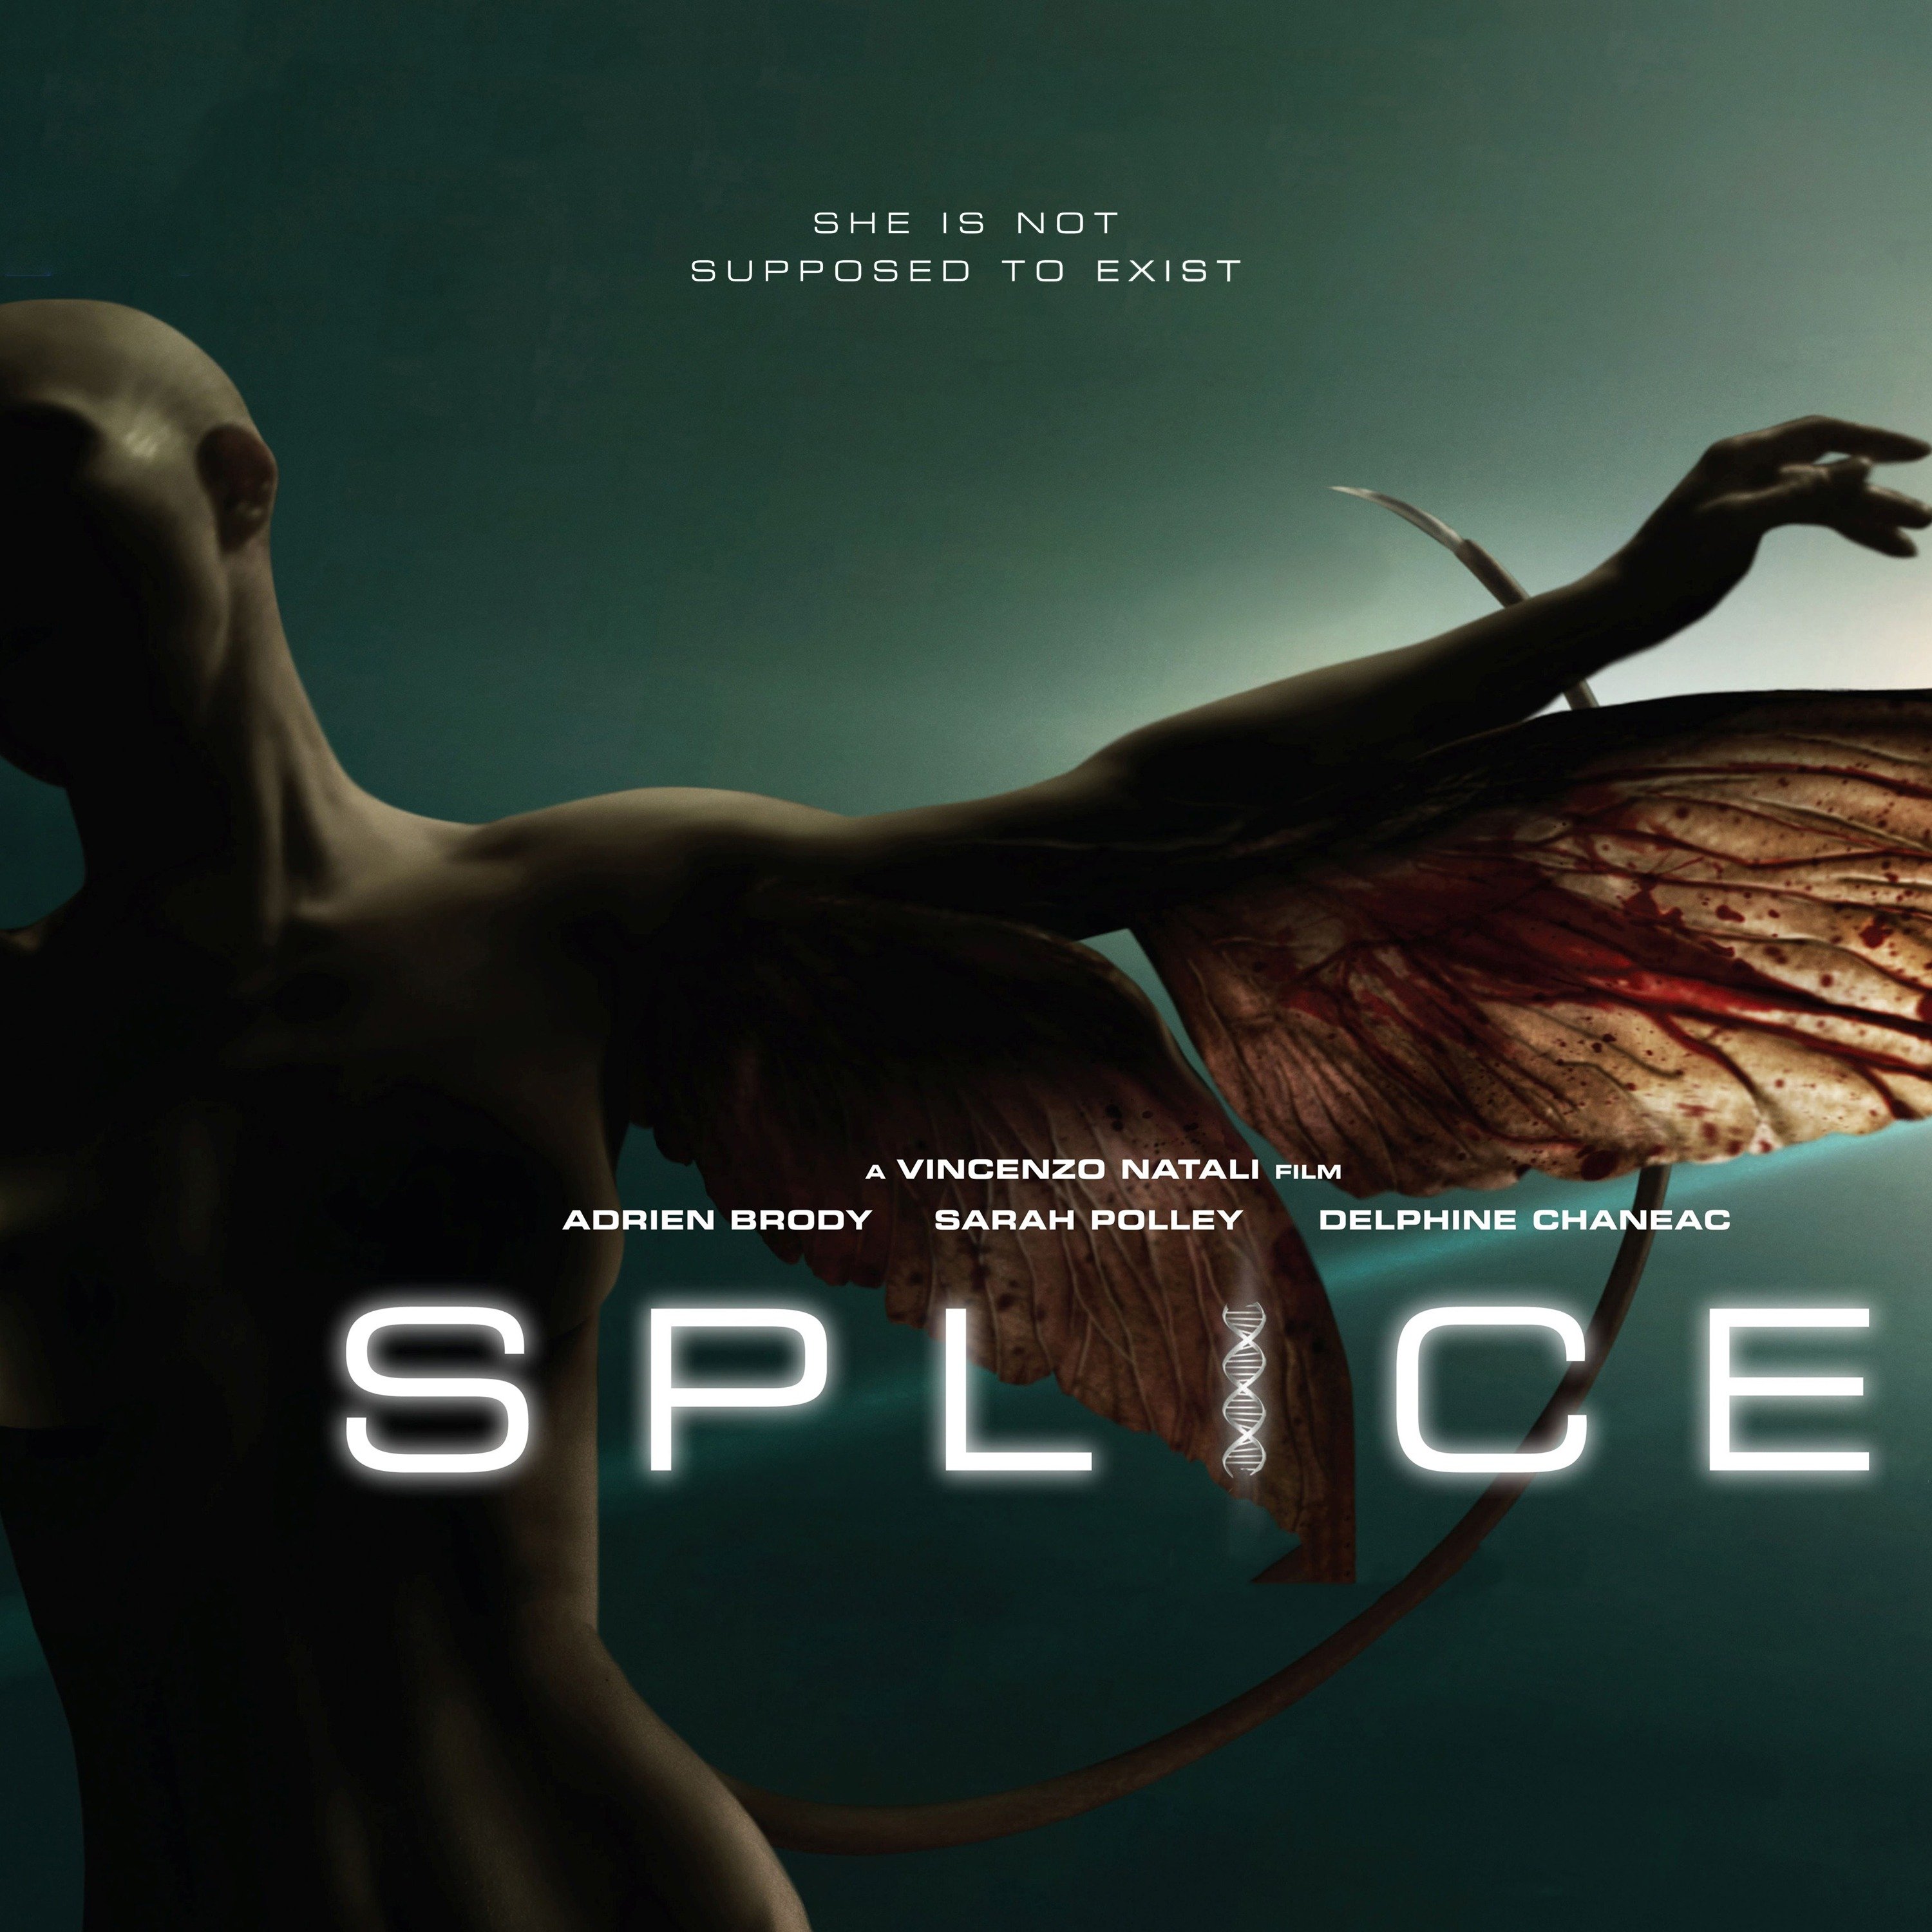 brittani weathers recommends splice full movie online pic